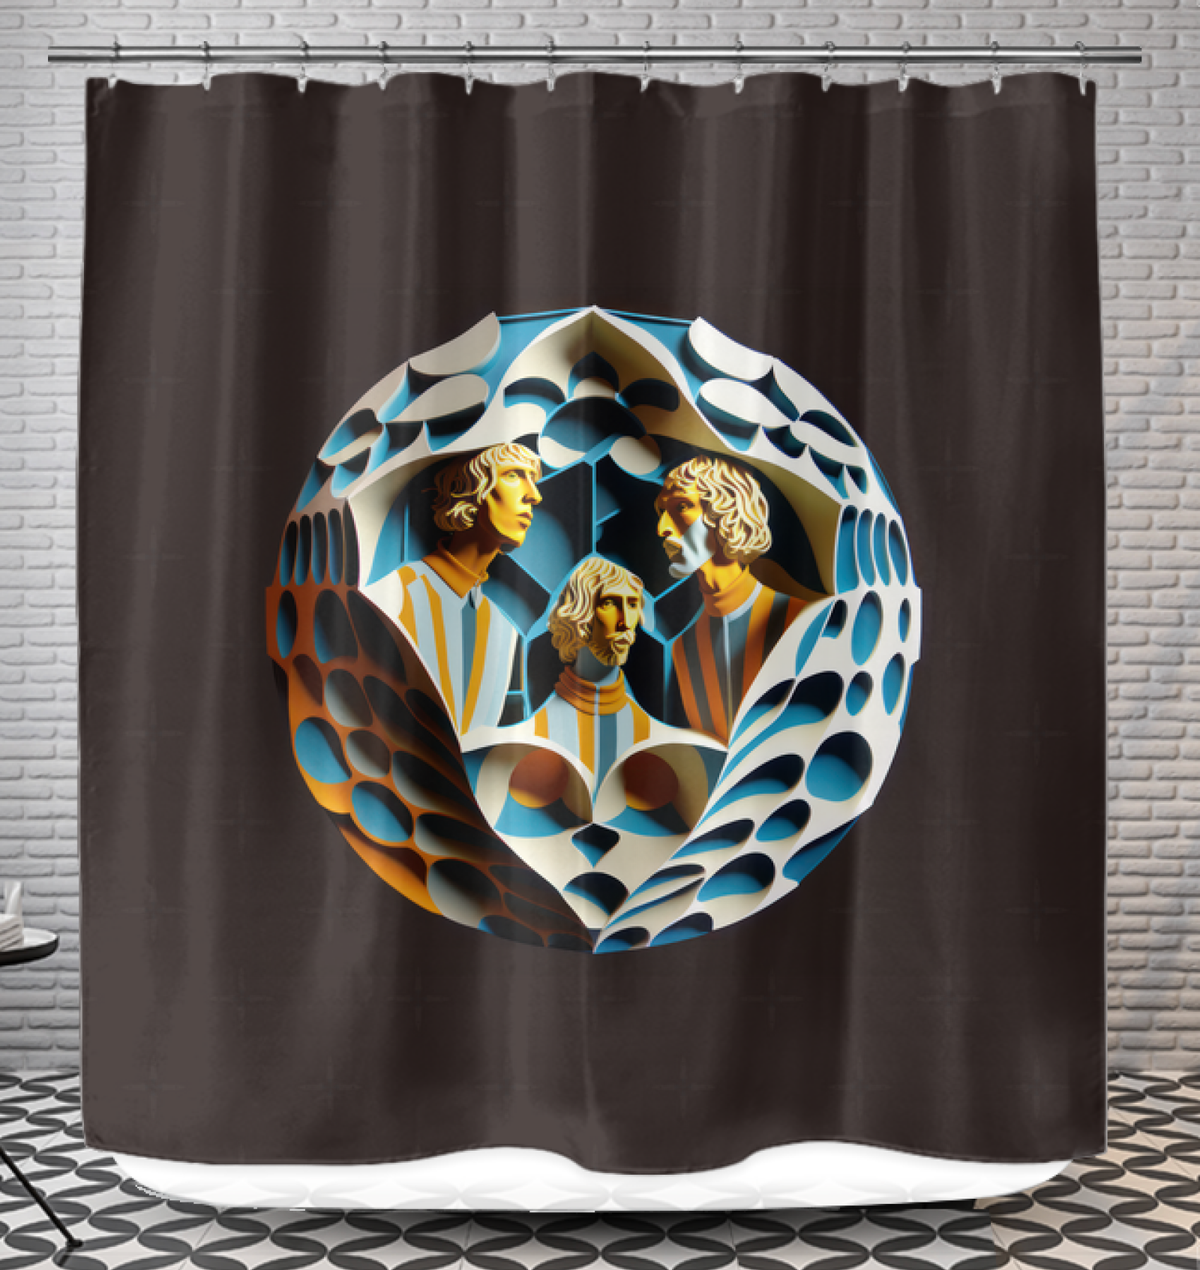 Acoustic Afternoon Shower Curtain